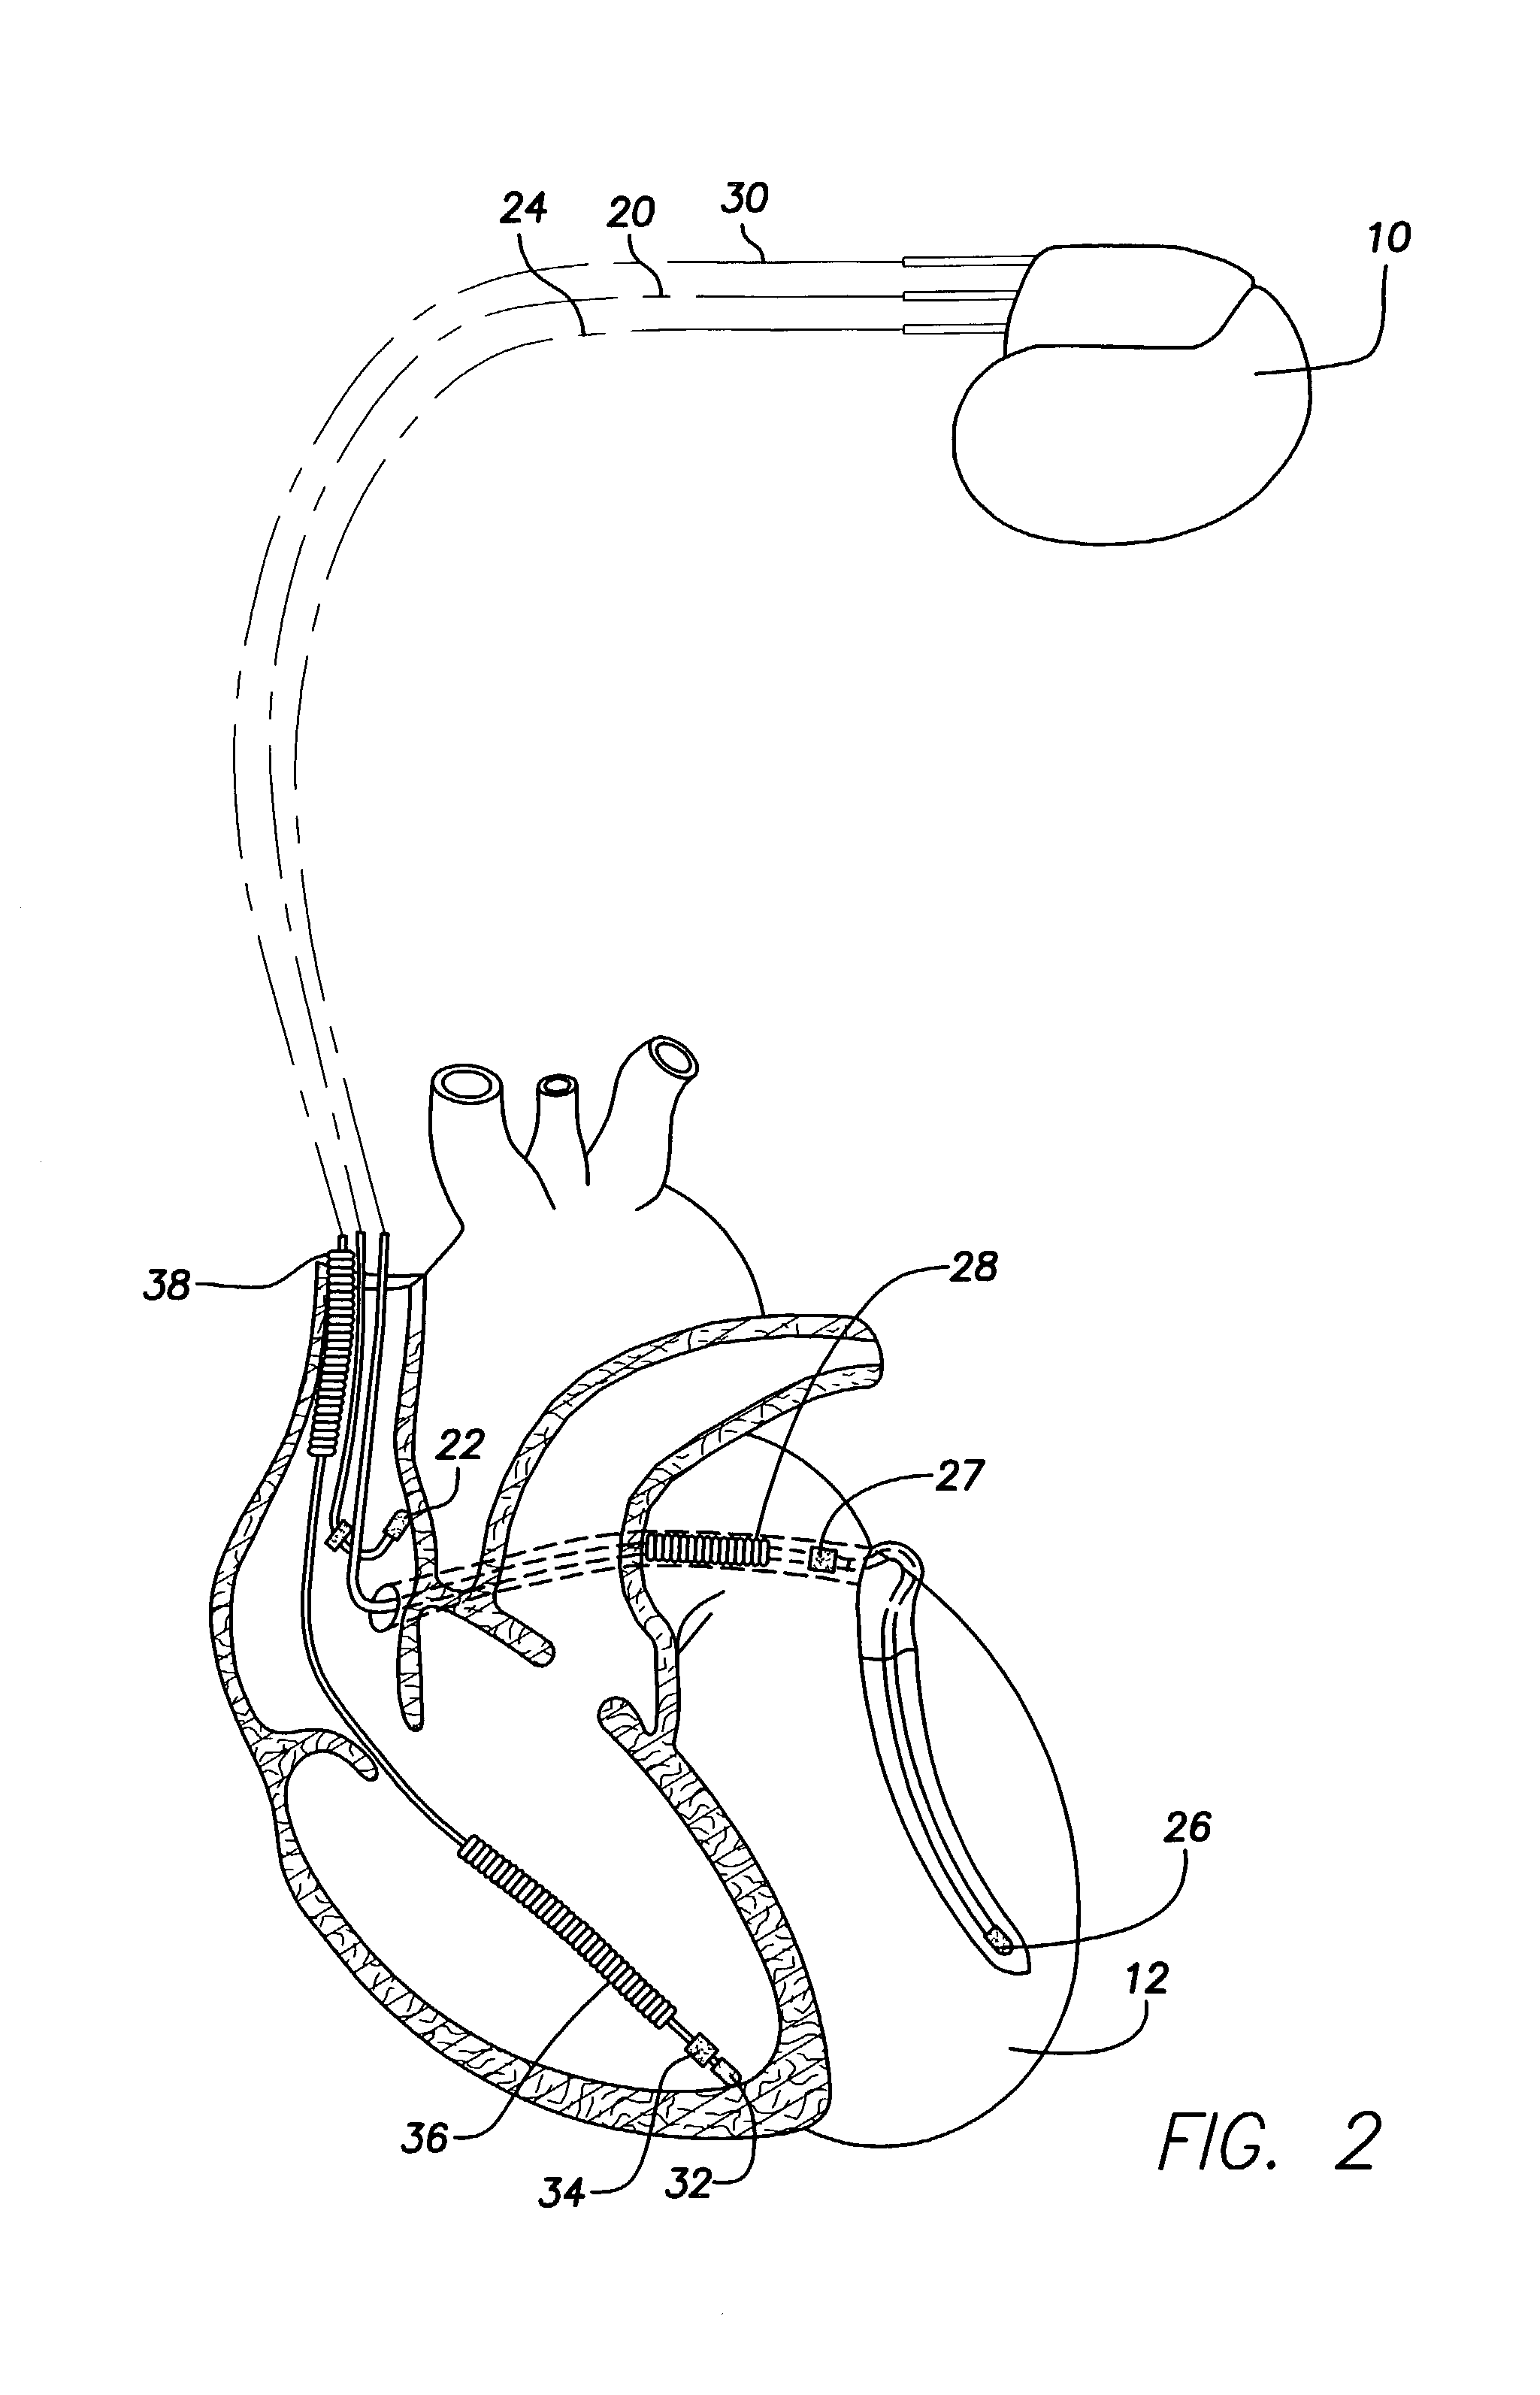 Method and apparatus for programming a rate responsive implantable cardiac stimulation device using user specified rate response functions